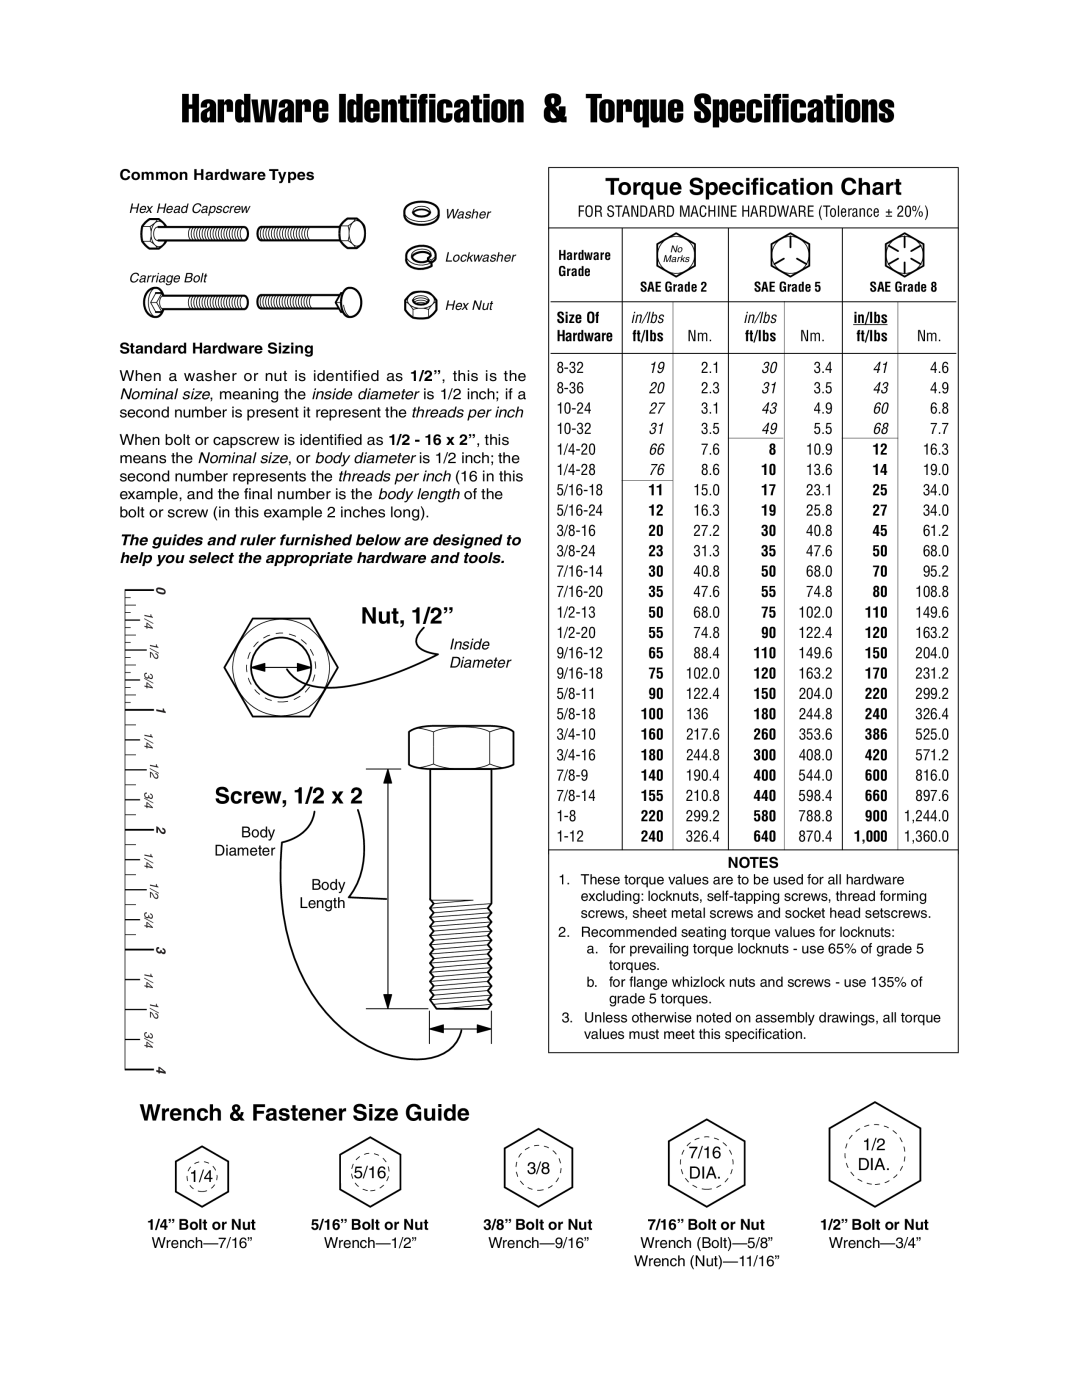 Simplicity 1694399 Wrench & Fastener Size Guide, Hardware Identification & Torque Specifications, Nut, 1/2”, Screw, 1/2 x 